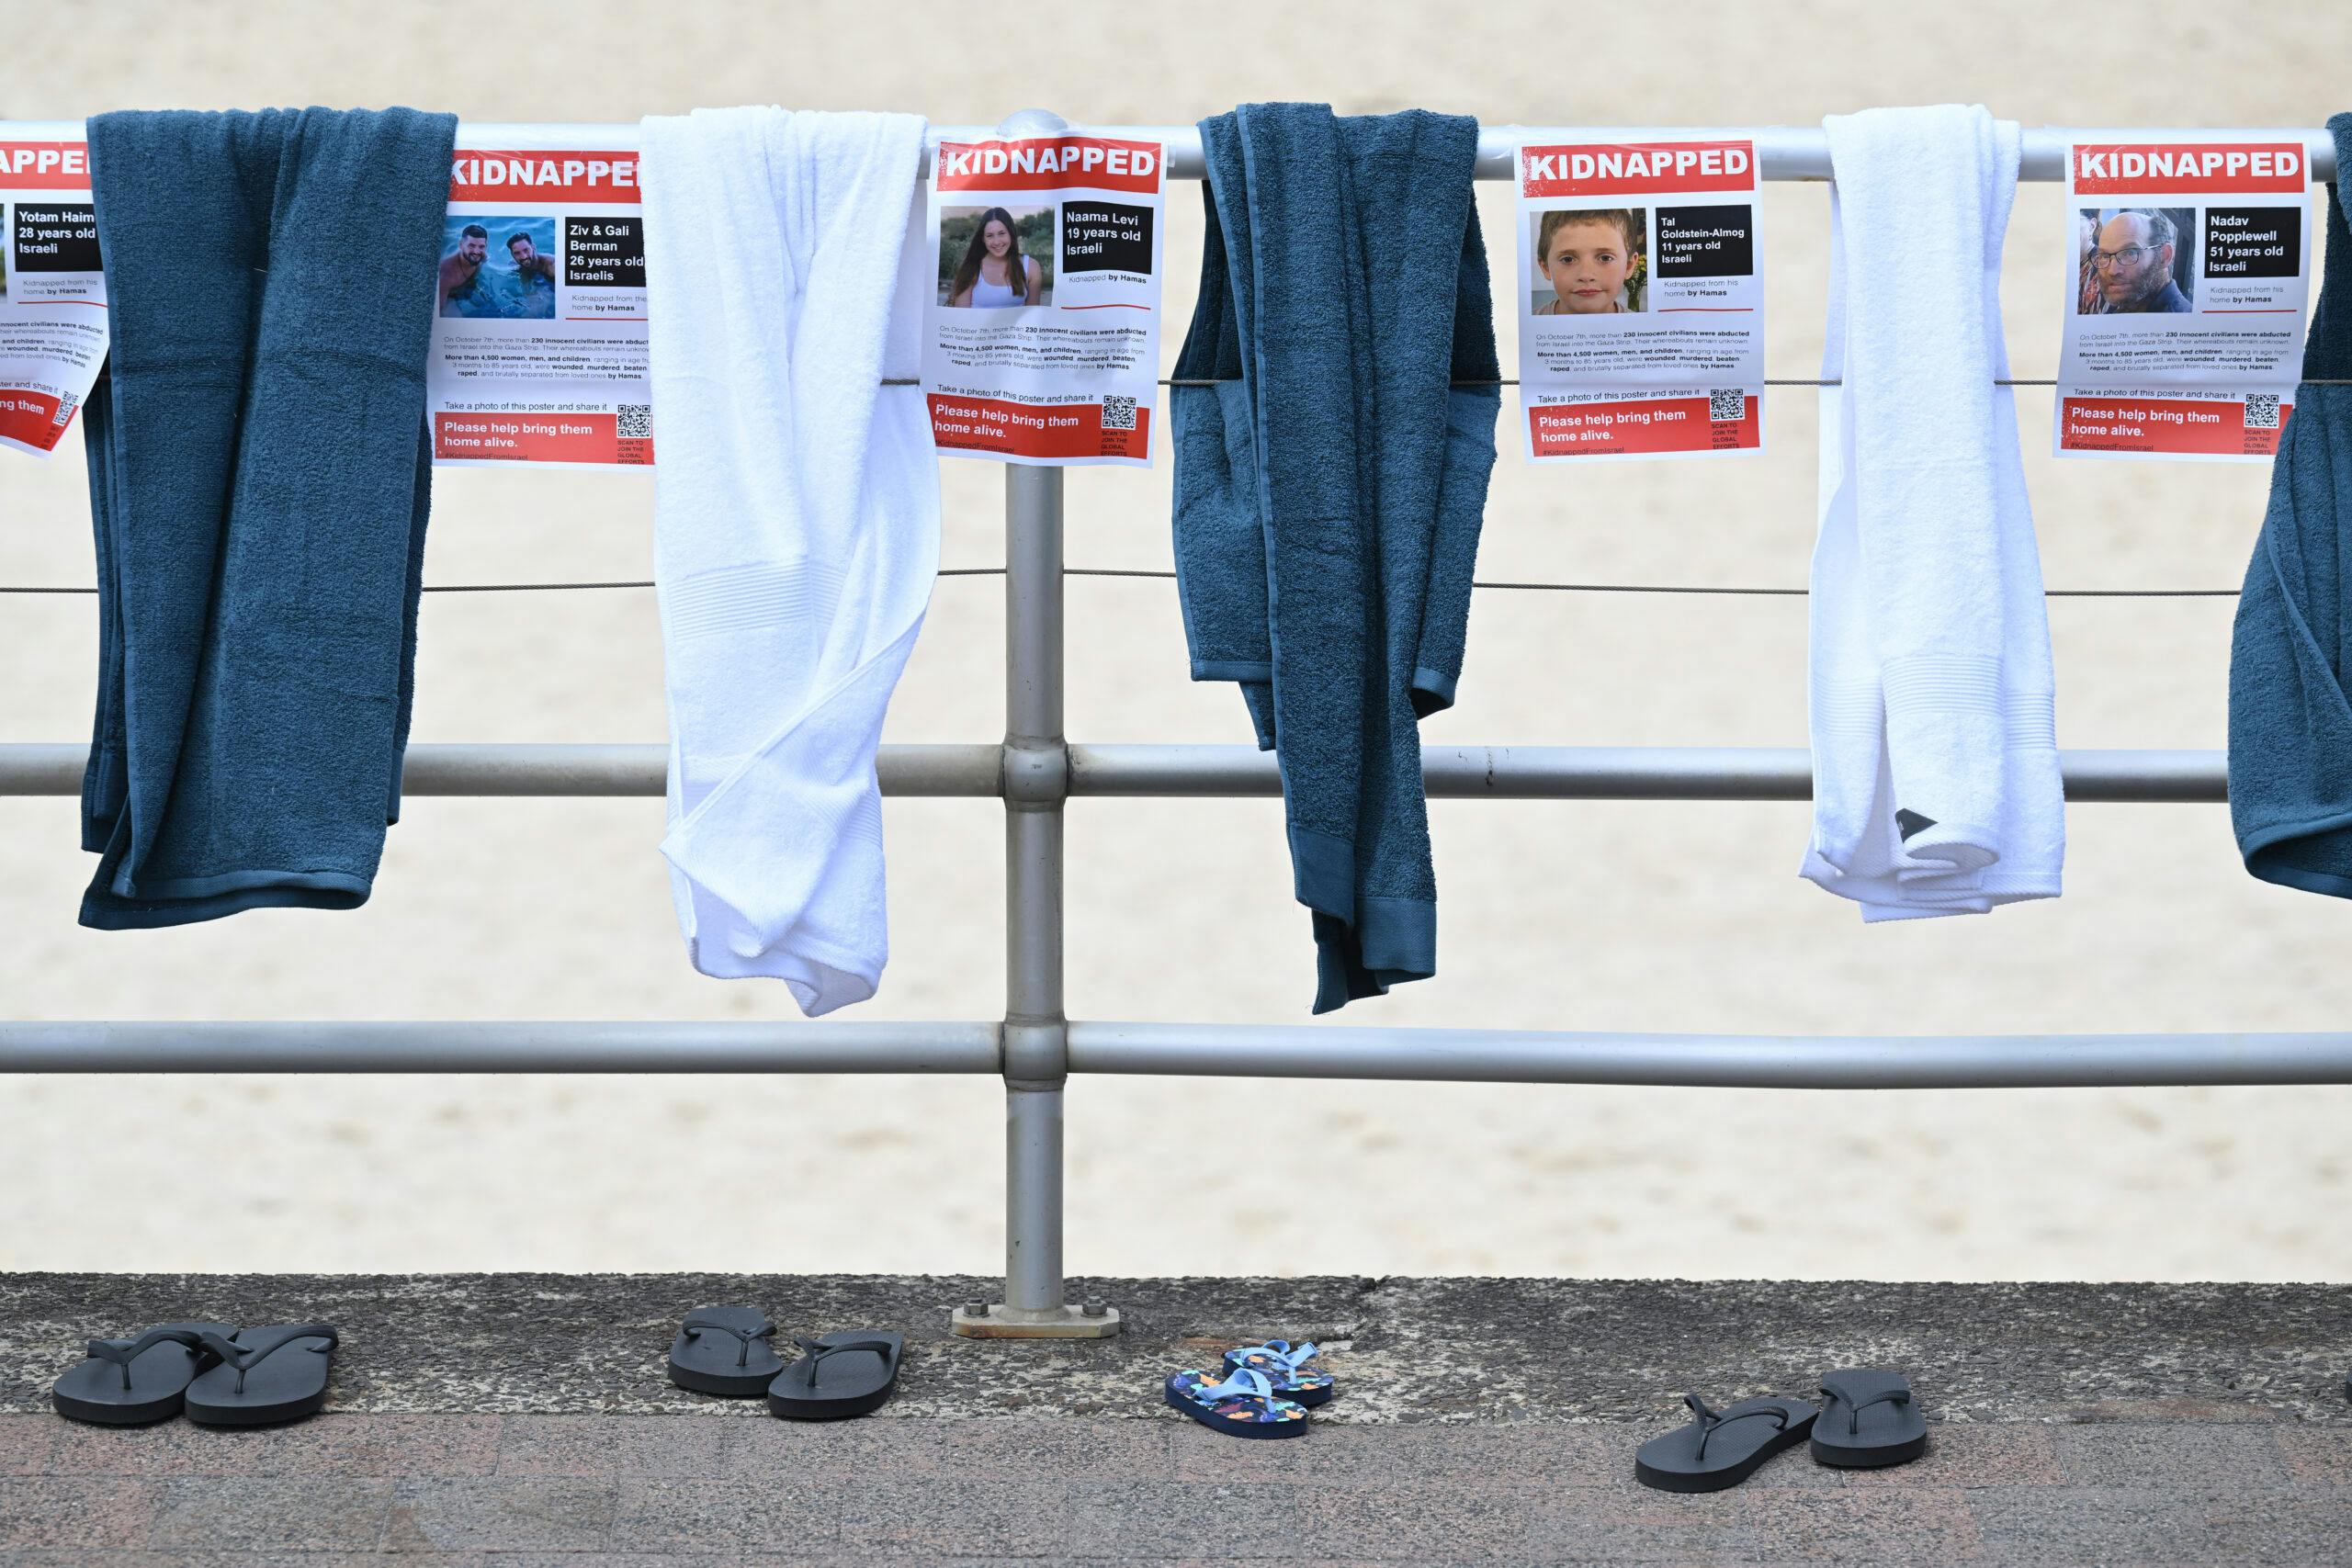 An installation of beach towels and thongs along side posters showing those kidnapped in support of the Global #BringThemHome Campaign at Bondi Beach in Sydney, Thursday, November 2, 2023.